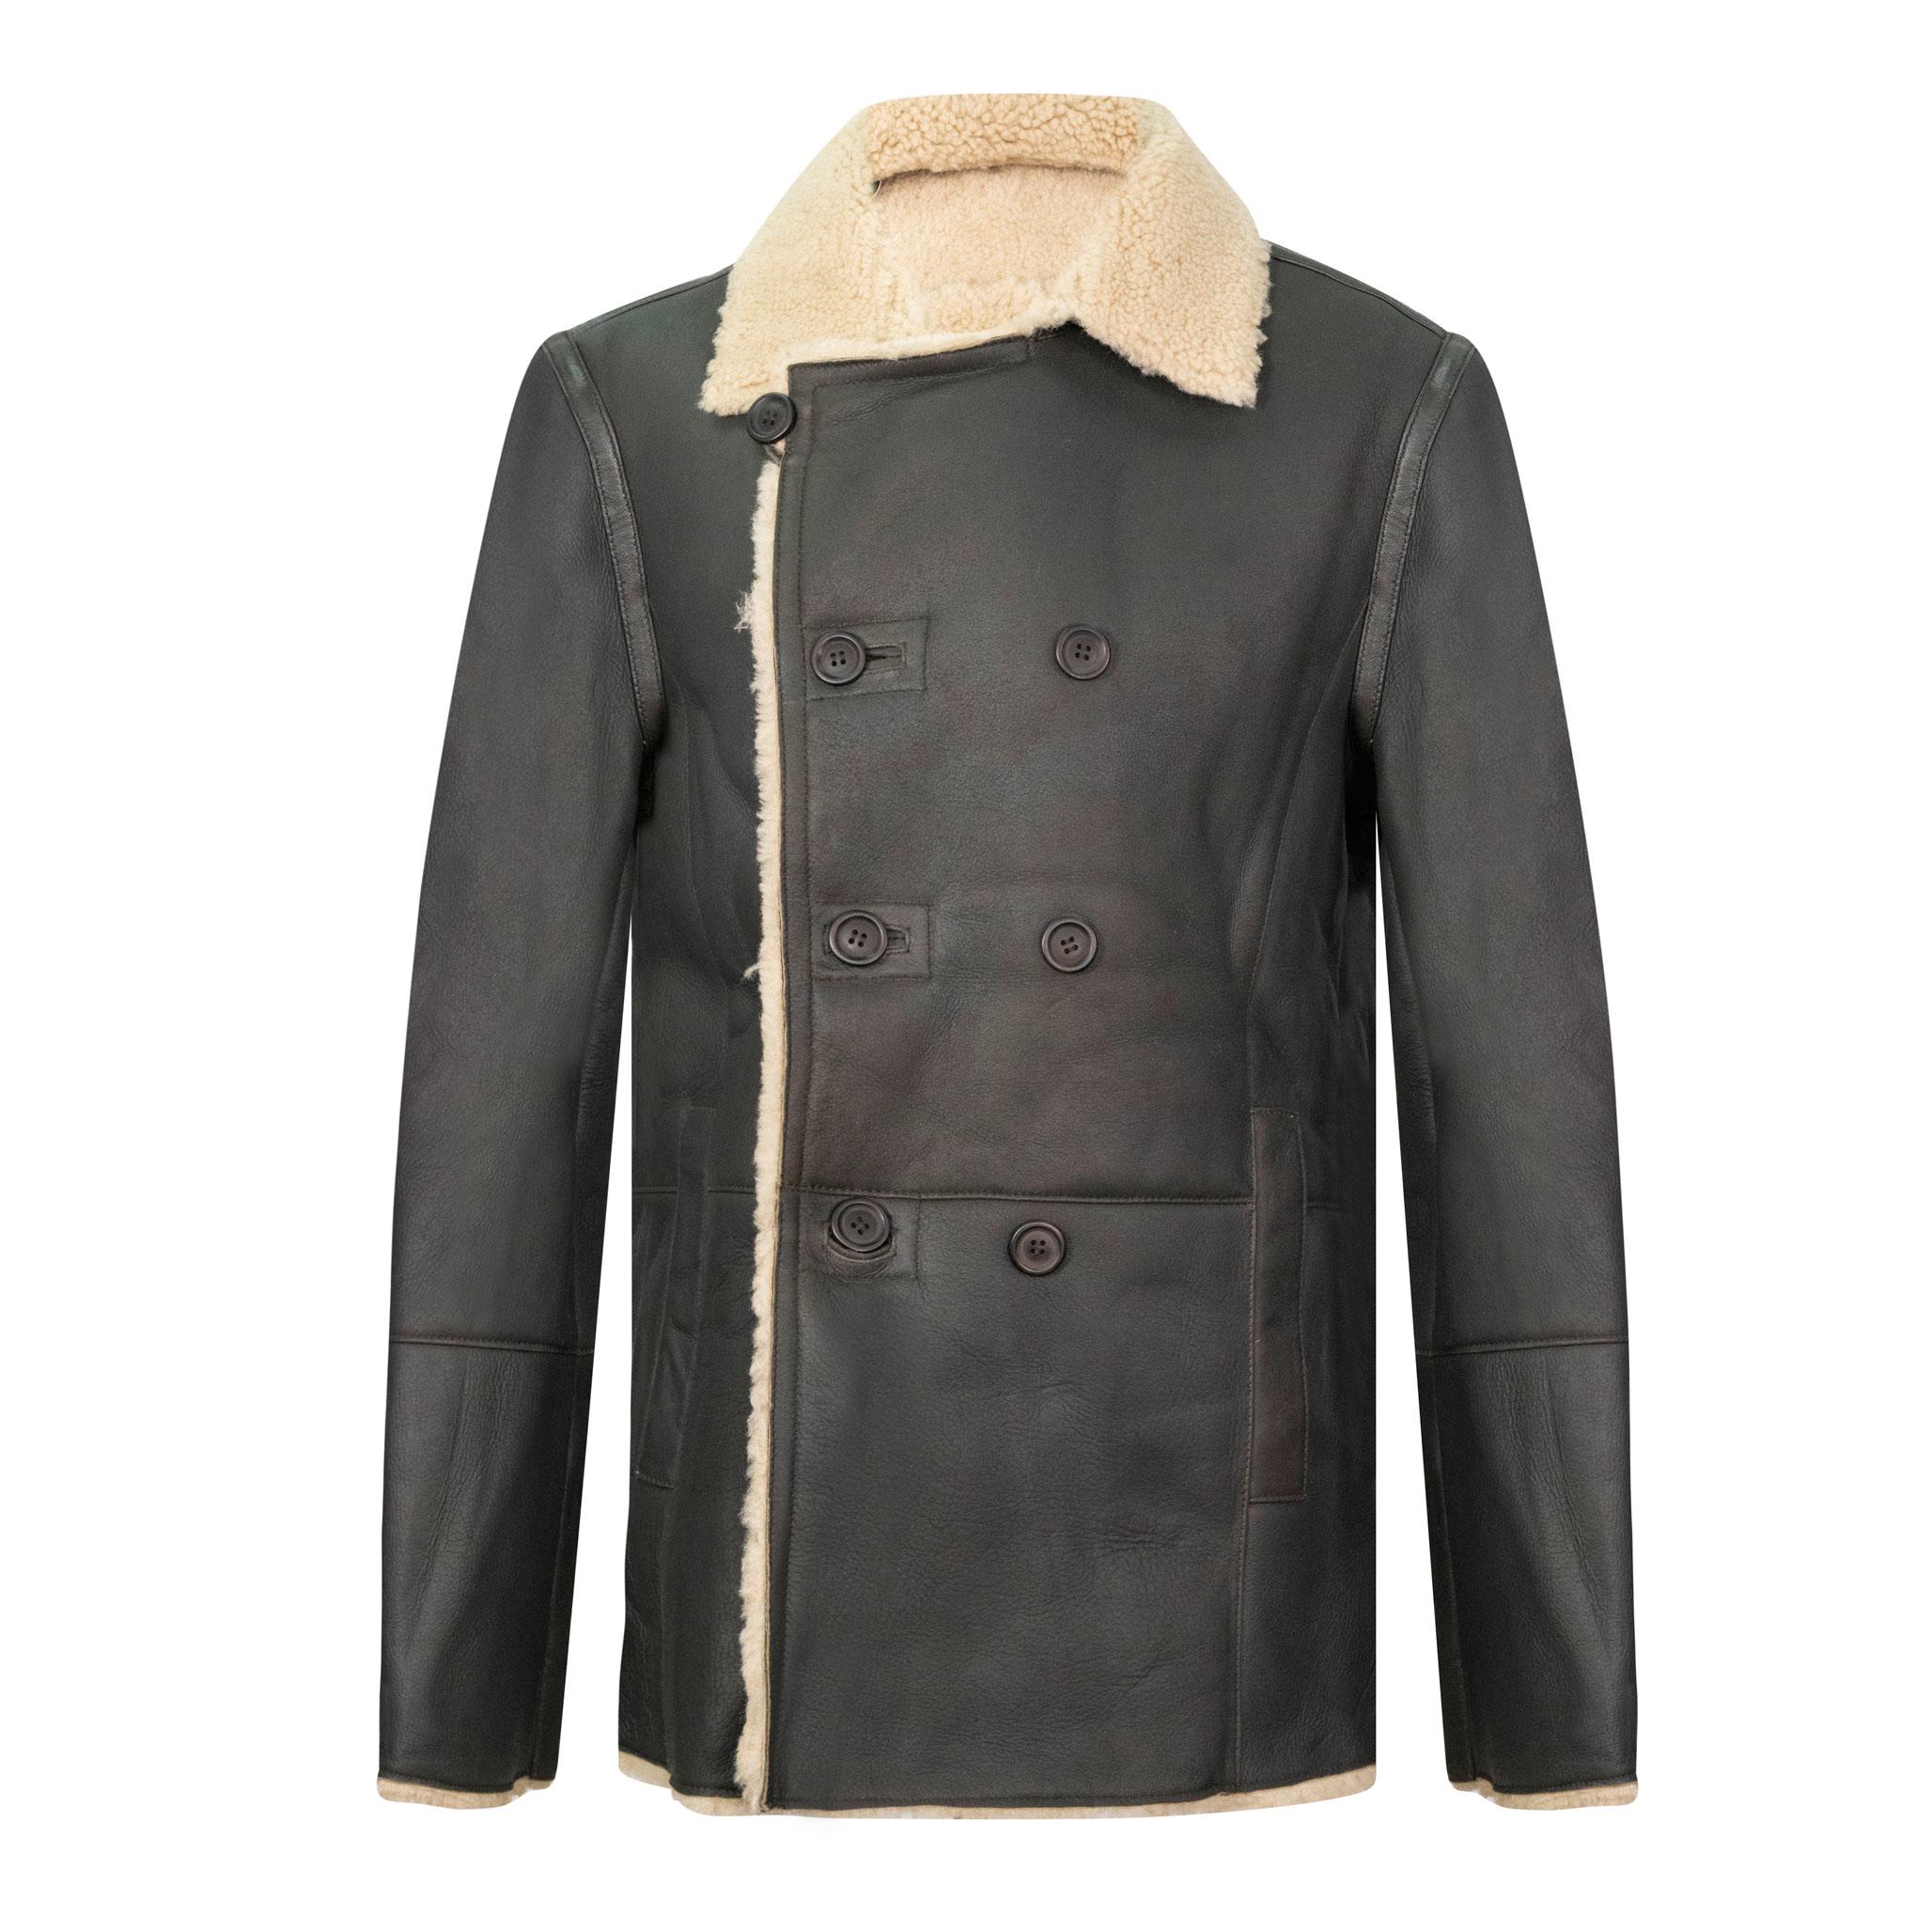 A luxurious sheepskin coat in olive with cream fur. Buttoned double breasted fastening. 3/4 length.